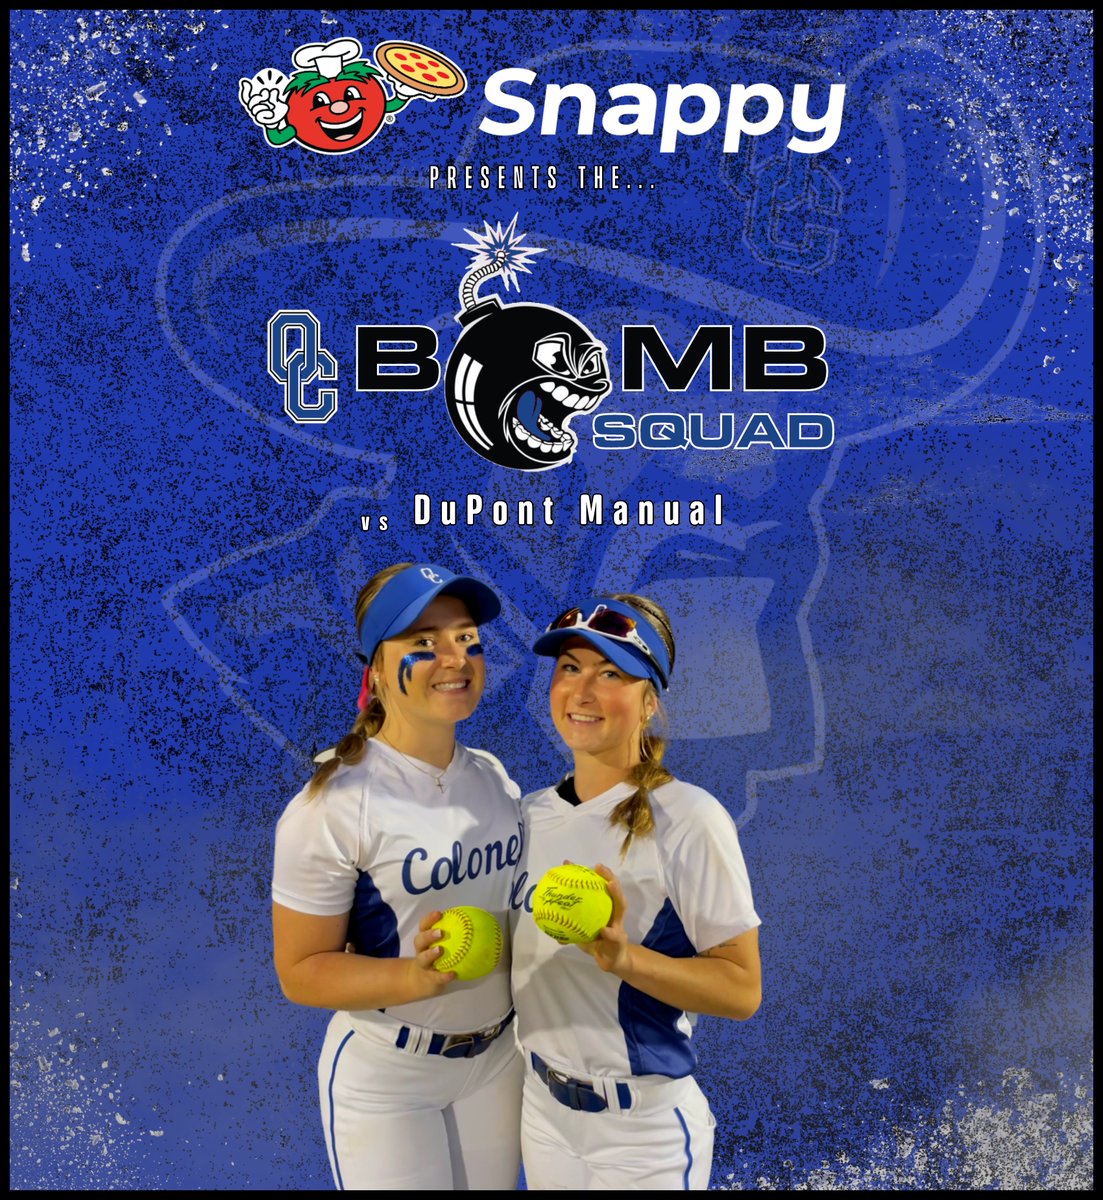 Oldham County’s Bomb Squad is brought to you by @Snappy_Tomato - LaGrange!

2 Bombs for OC to support tonight’s game vs. Manual!
@BreckynHamm 💣
@JozieLashley 💣

@OCColonelNation 
#LadyColonelsSoftball
#WeAreOC